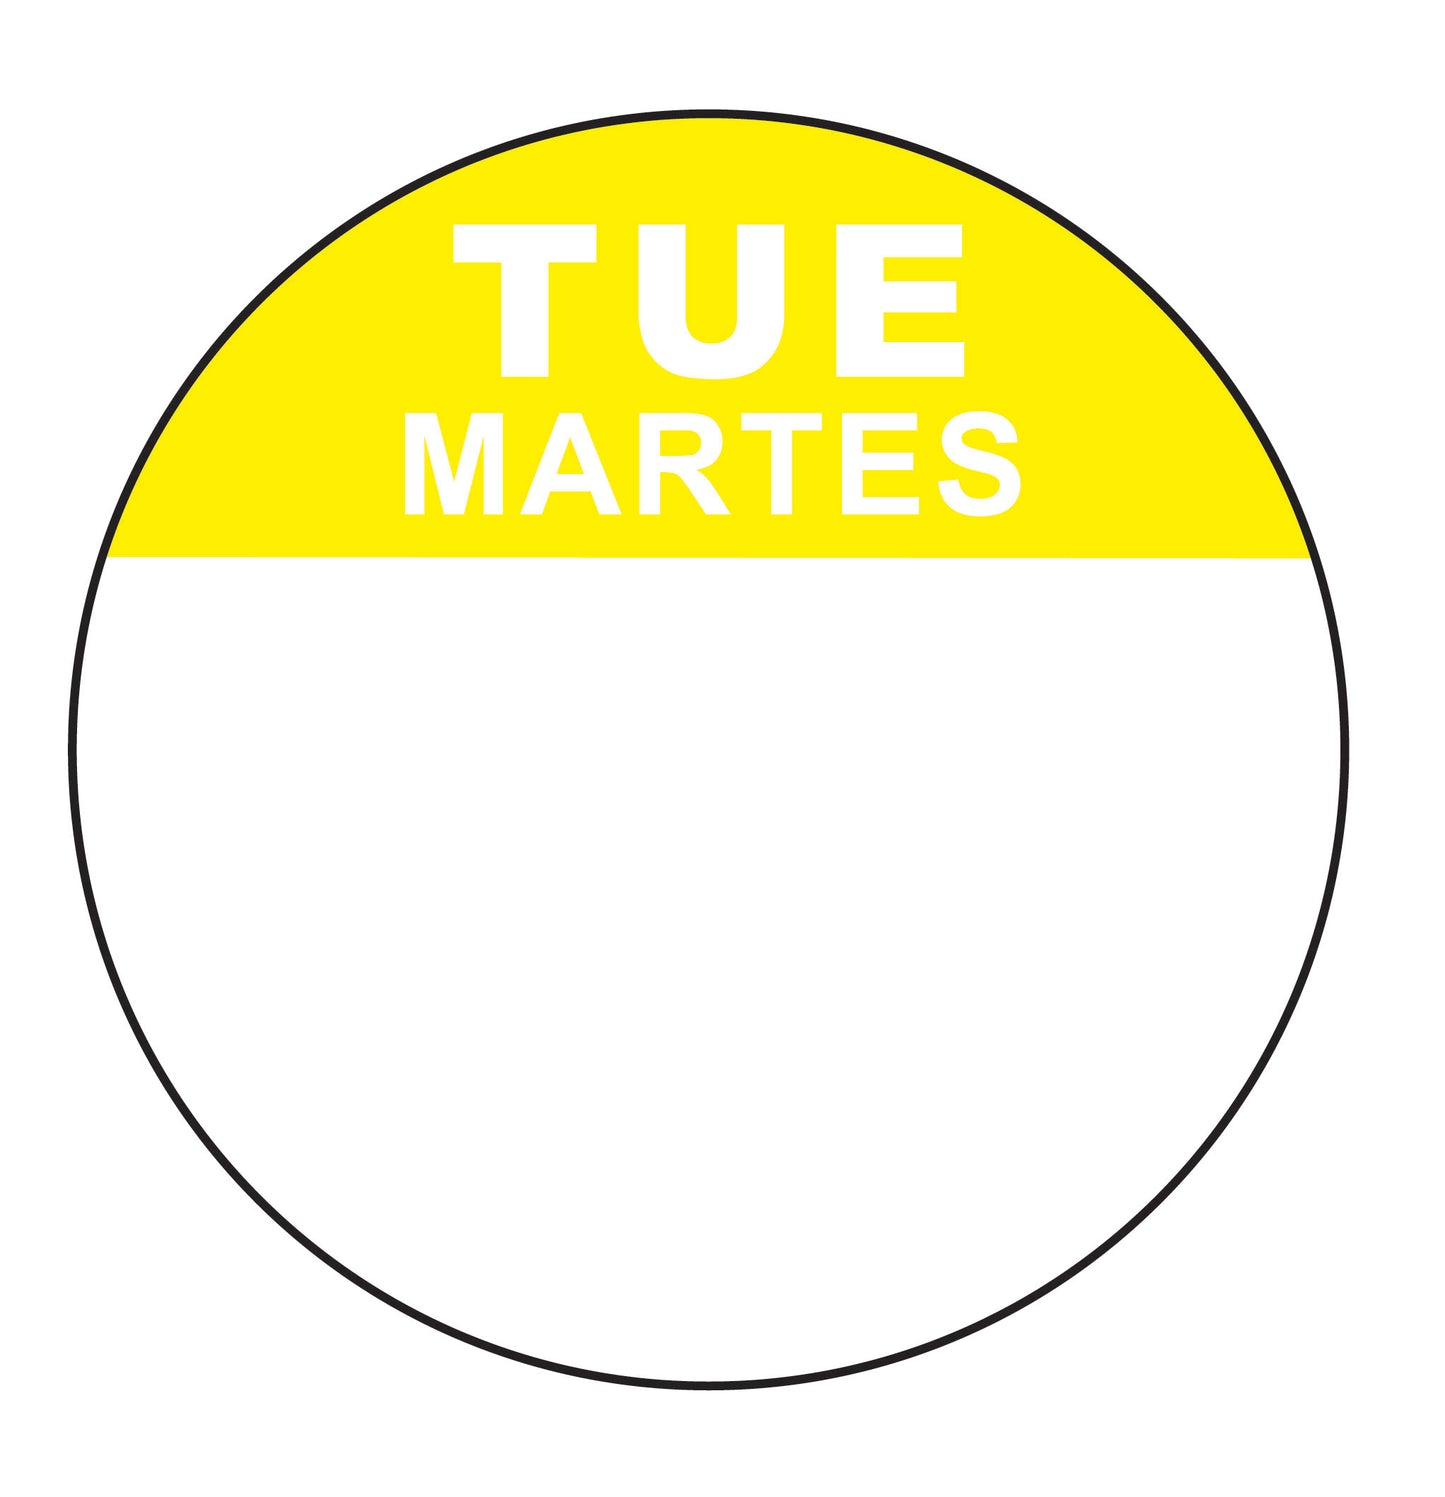 Tuesday - Martes 1.5" Cold Temperature Day of the Week Date Label